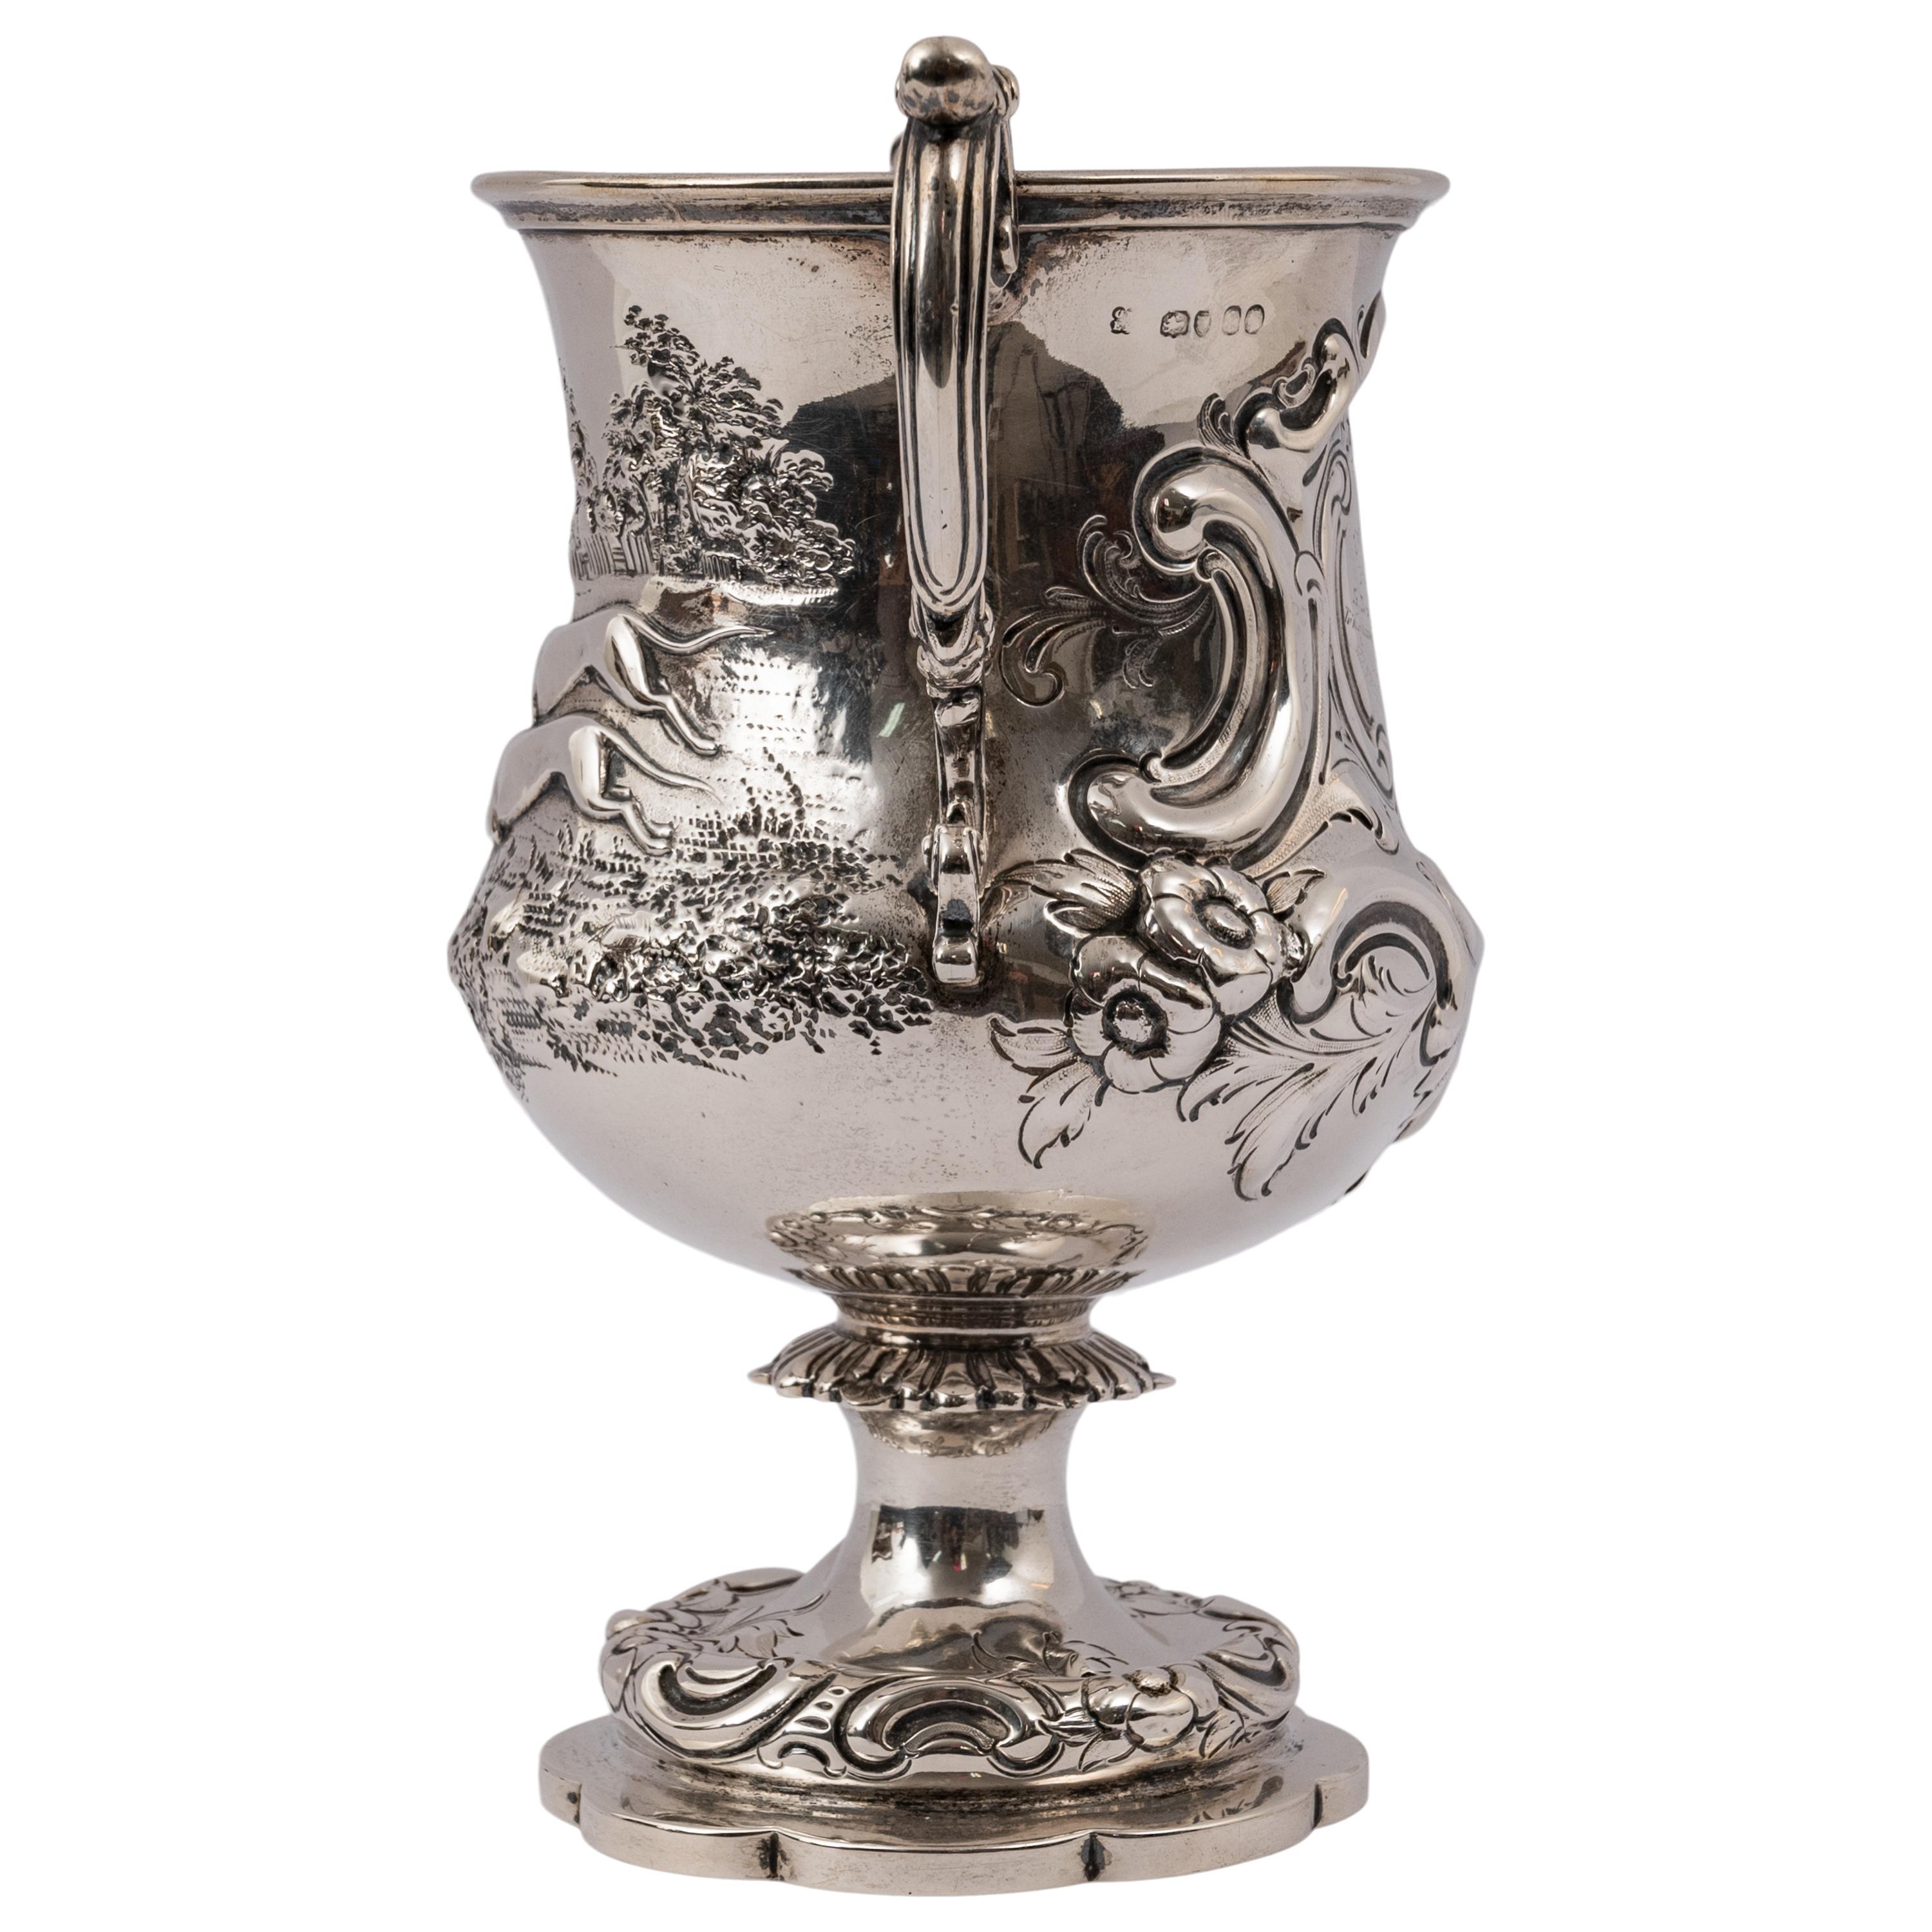 Rococo Revival Antique Irish Sterling Silver Chalice Dog Hare Coursing Hunting Trophy Dublin